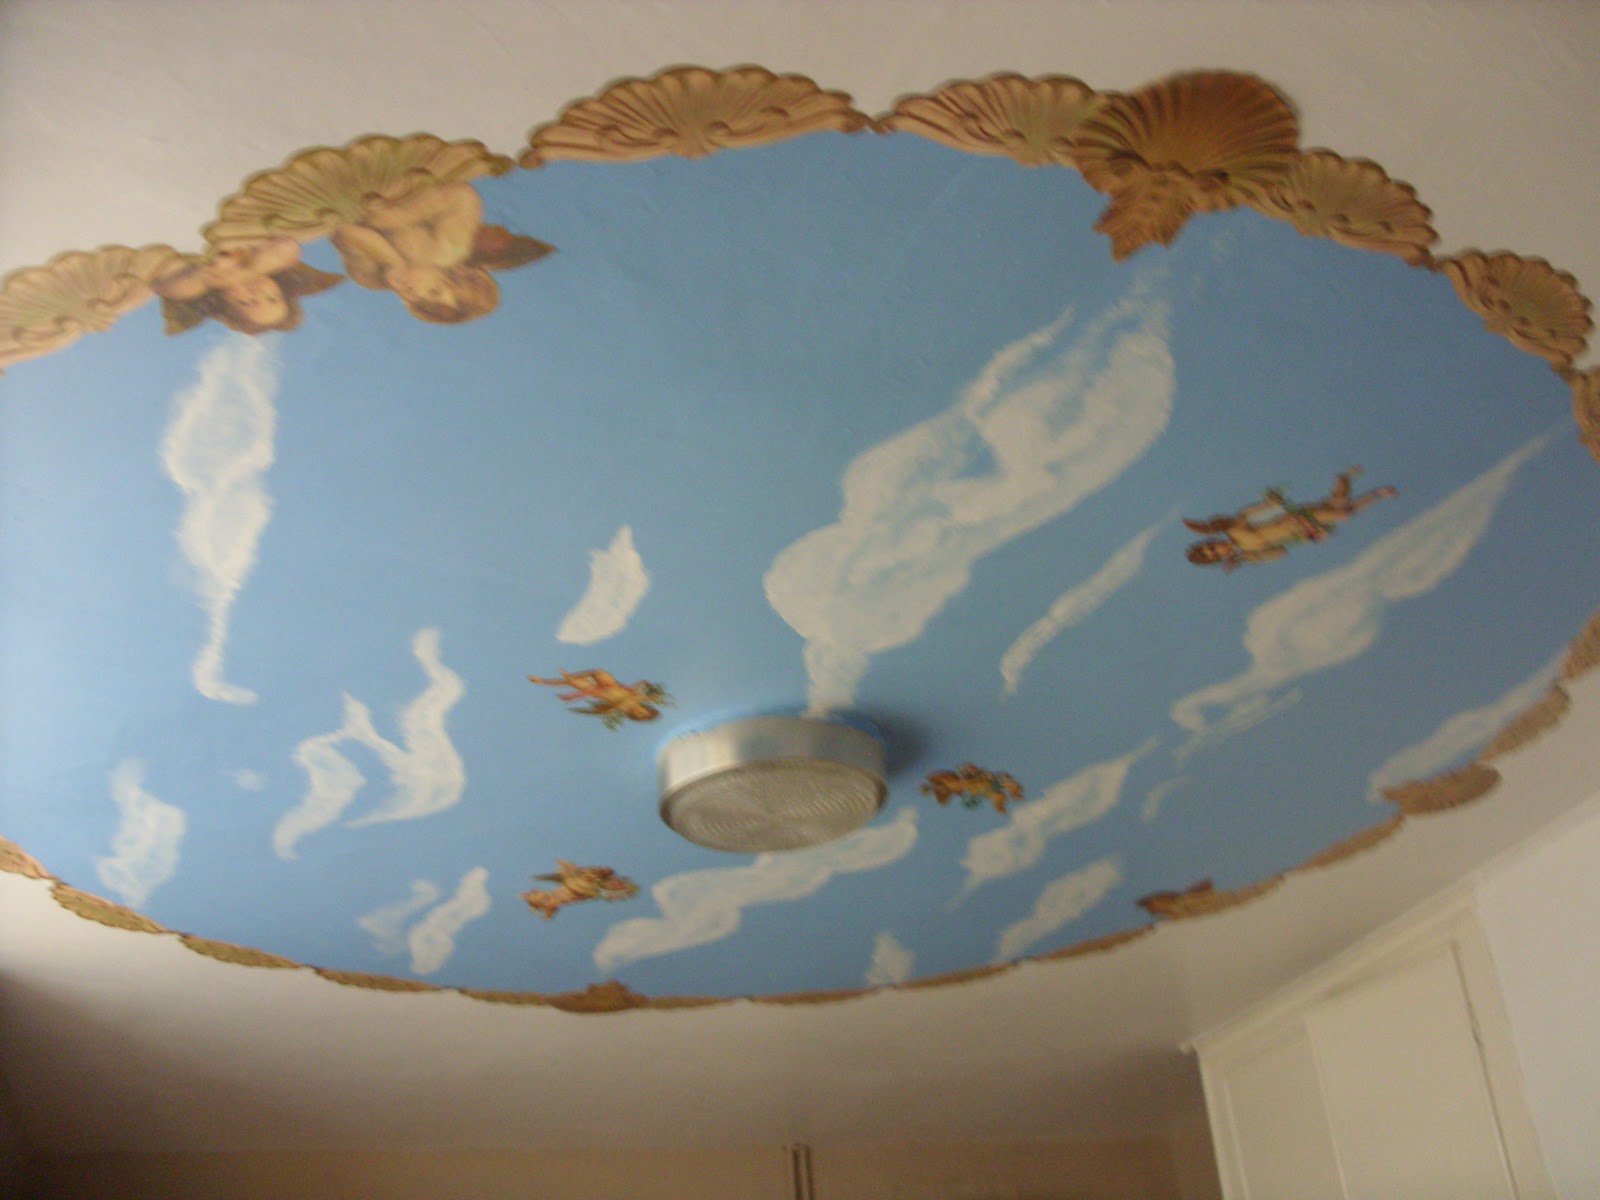  England PAINTED AND DECOUPAGE SKY CEILING WITH CLOUDS AND FAIRIES